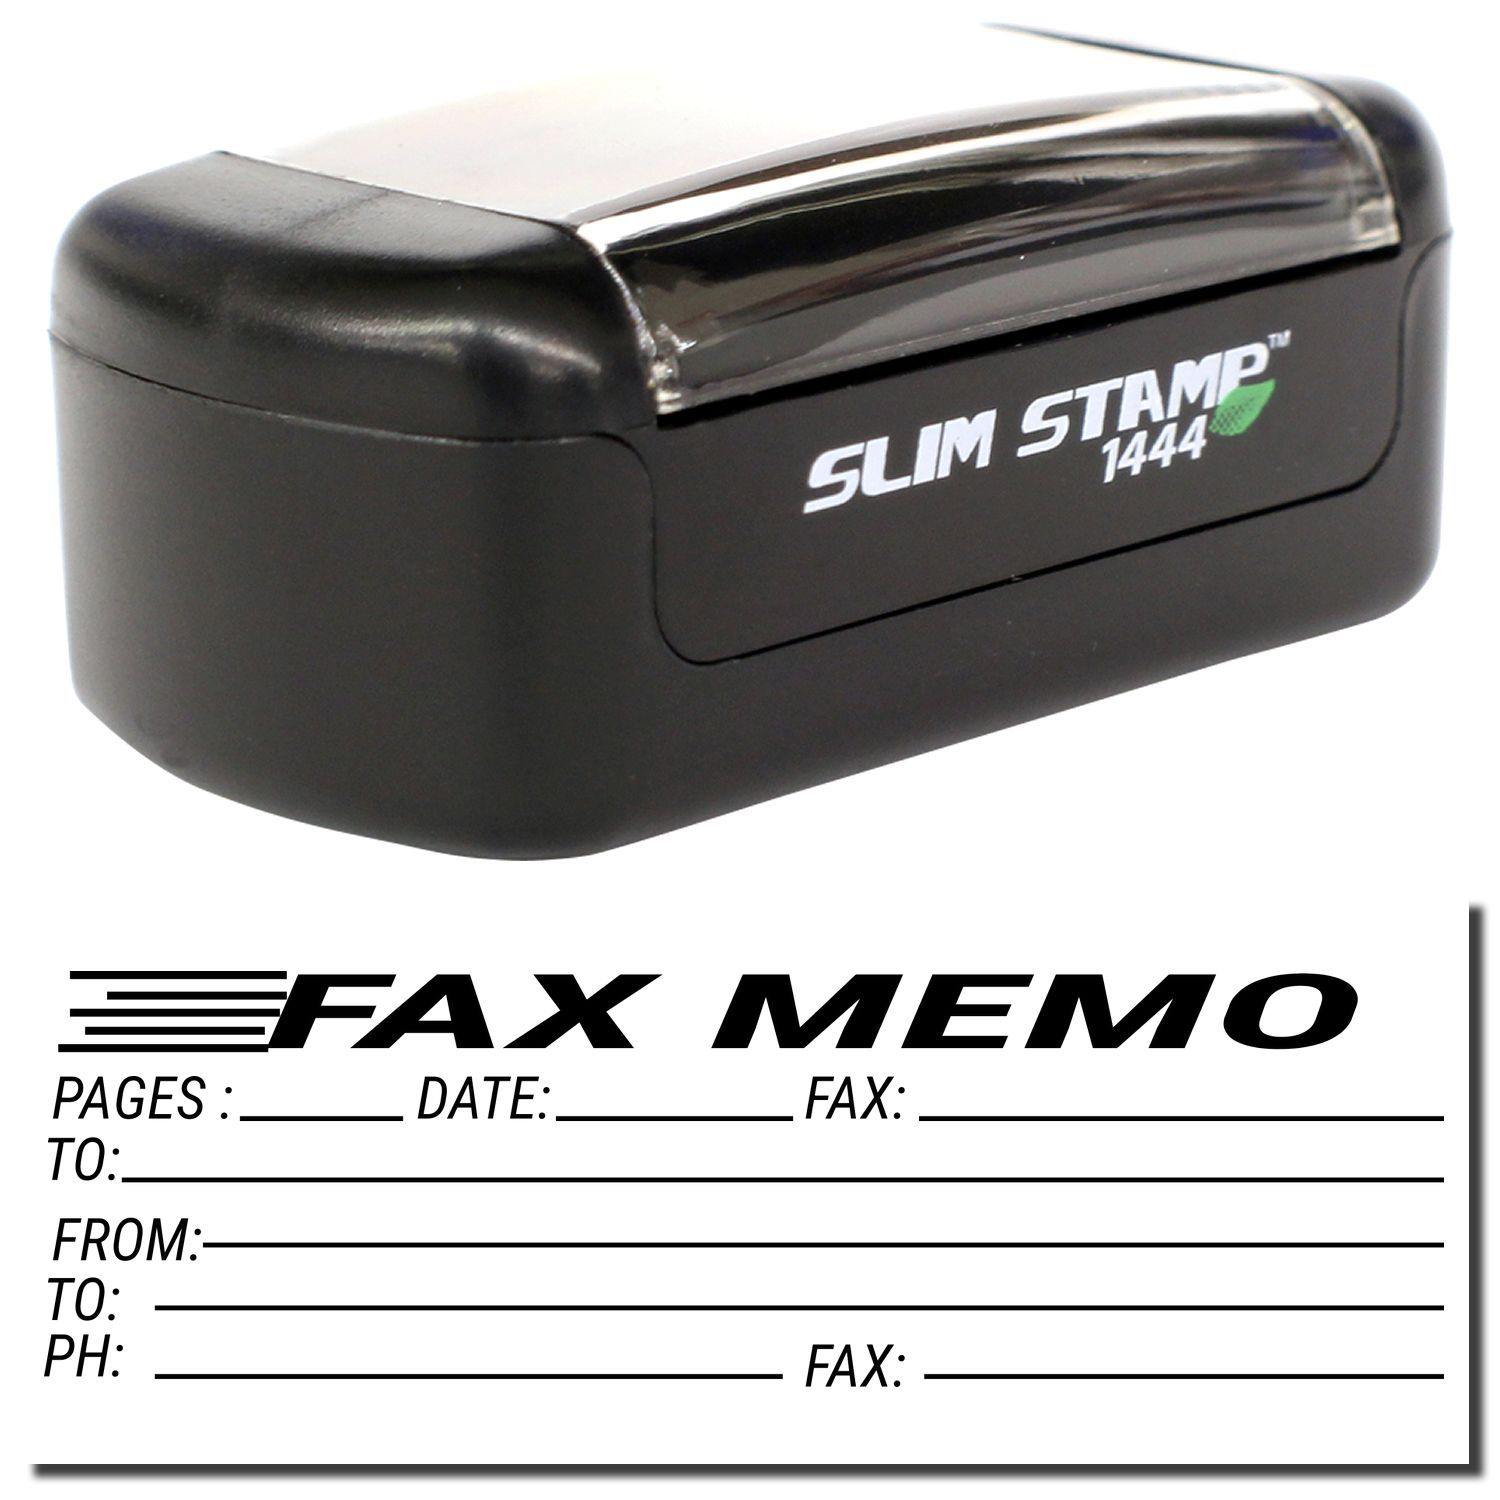 A stock office pre-inked stamp with a stamped image showing how the text "FAX MEMO" is displayed horizontally with a form underneath for filling in various details of the fax is shown after stamping from it.